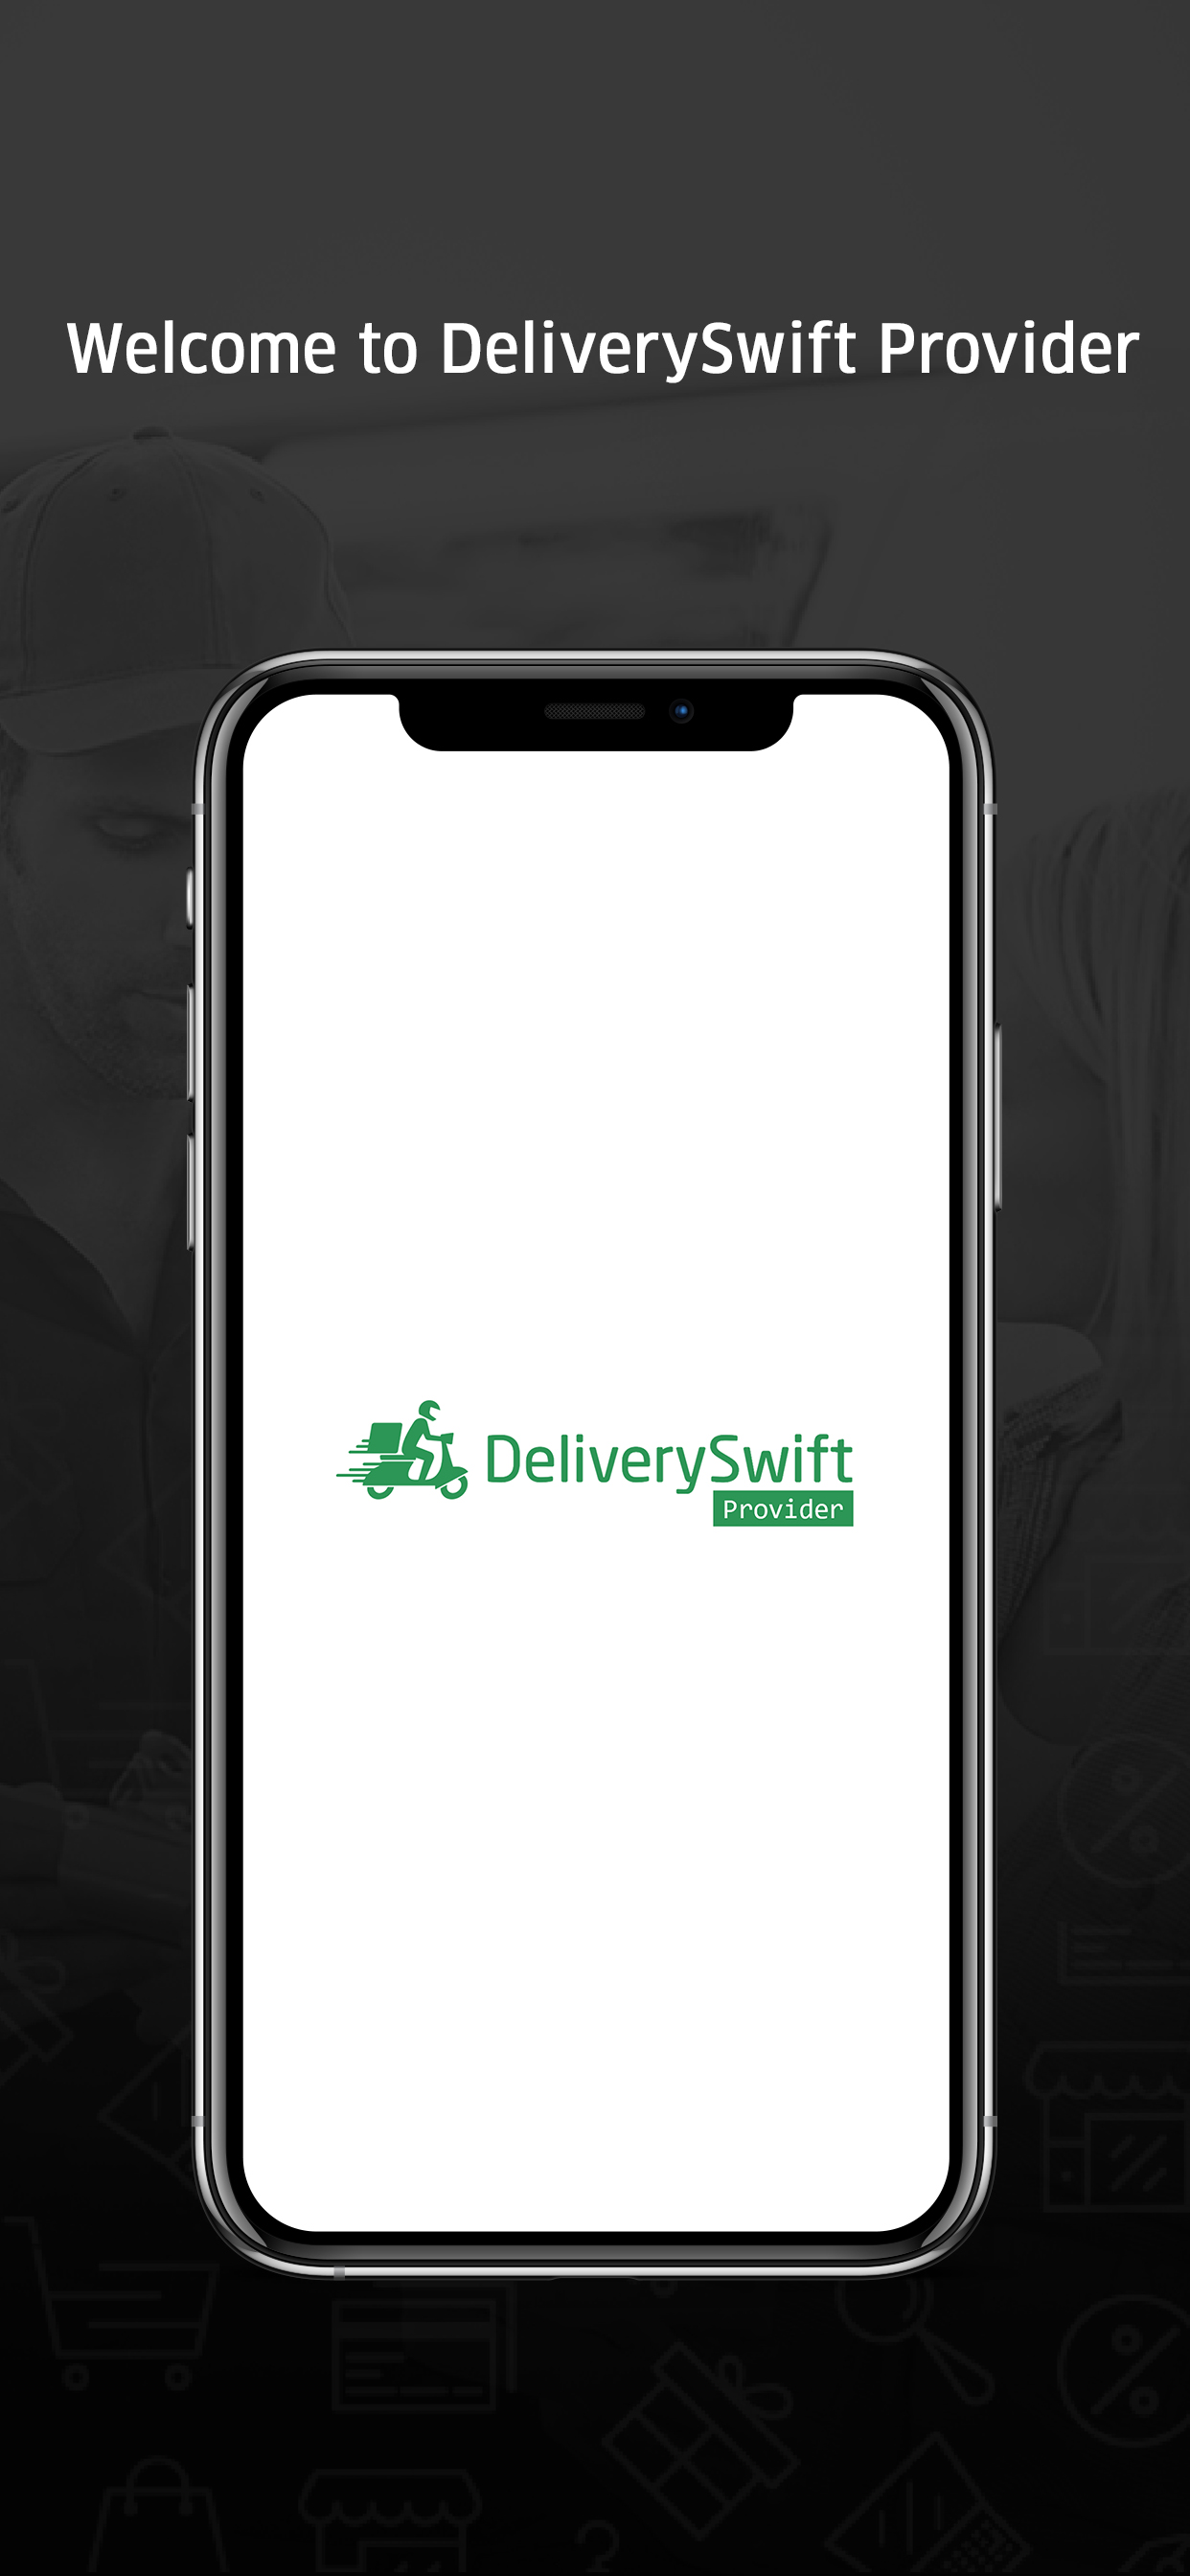 AppSwarm Delivery Swift app interface images